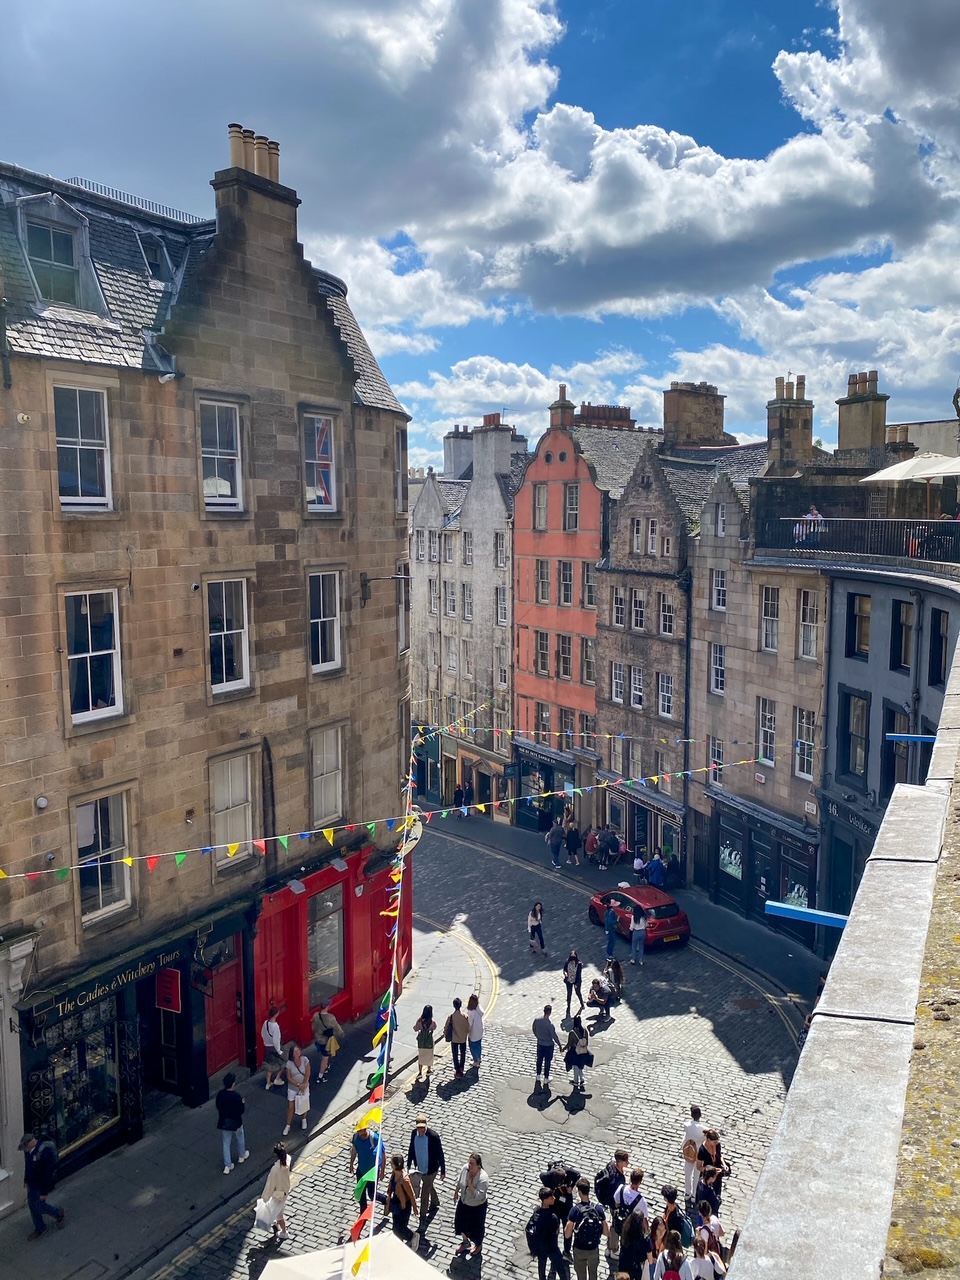 a view of Victoria Street during one of our free walking tours in Edinburgh